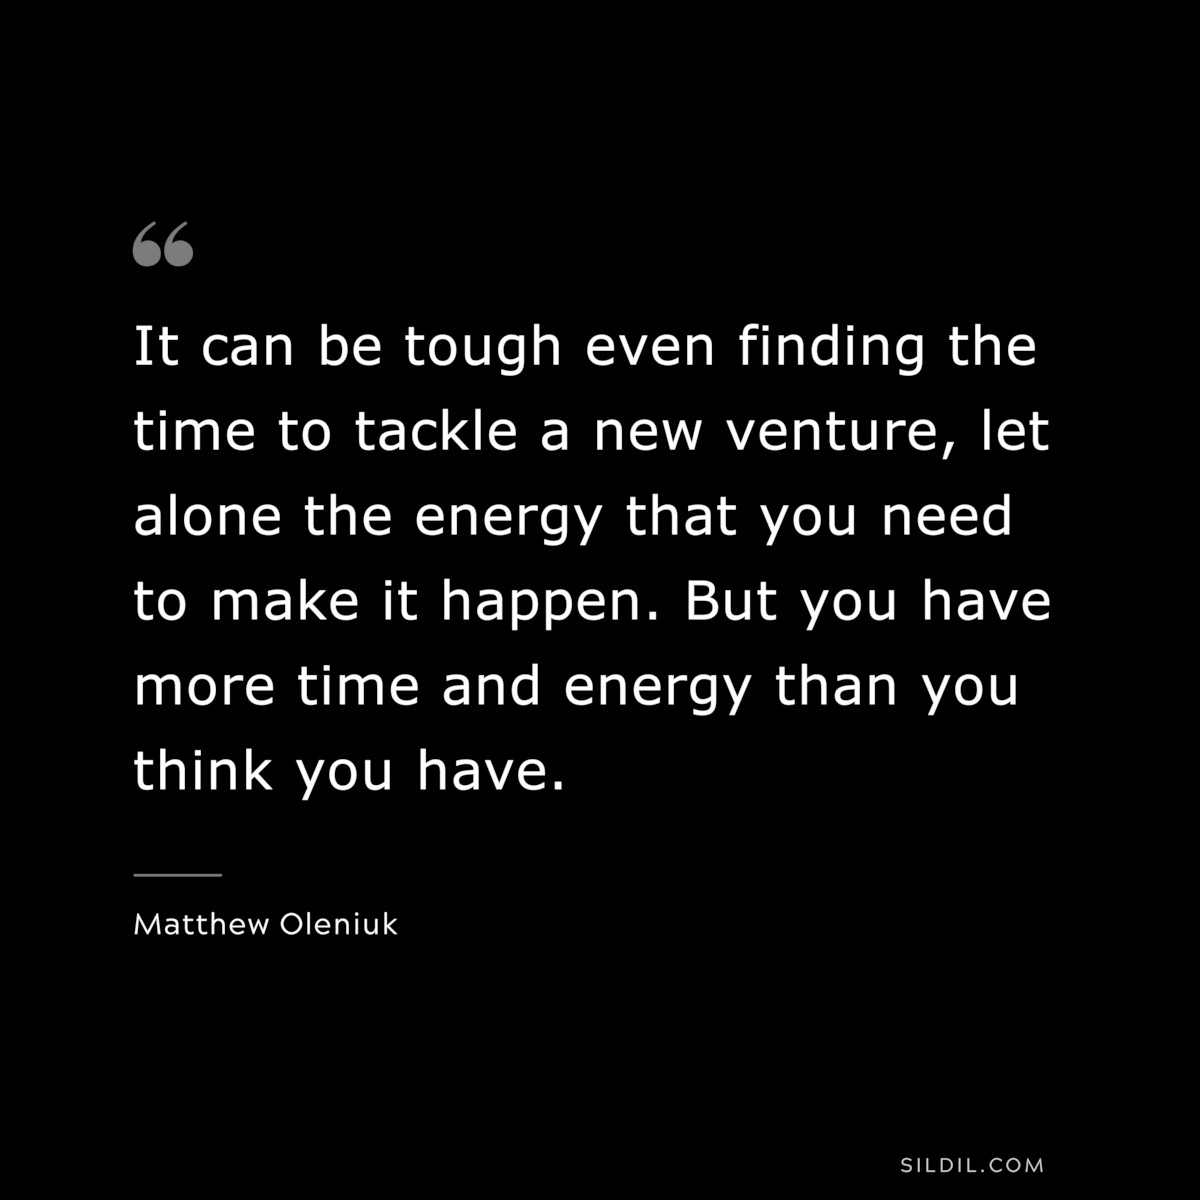 It can be tough even finding the time to tackle a new venture, let alone the energy that you need to make it happen. But you have more time and energy than you think you have. ― Matthew Oleniuk